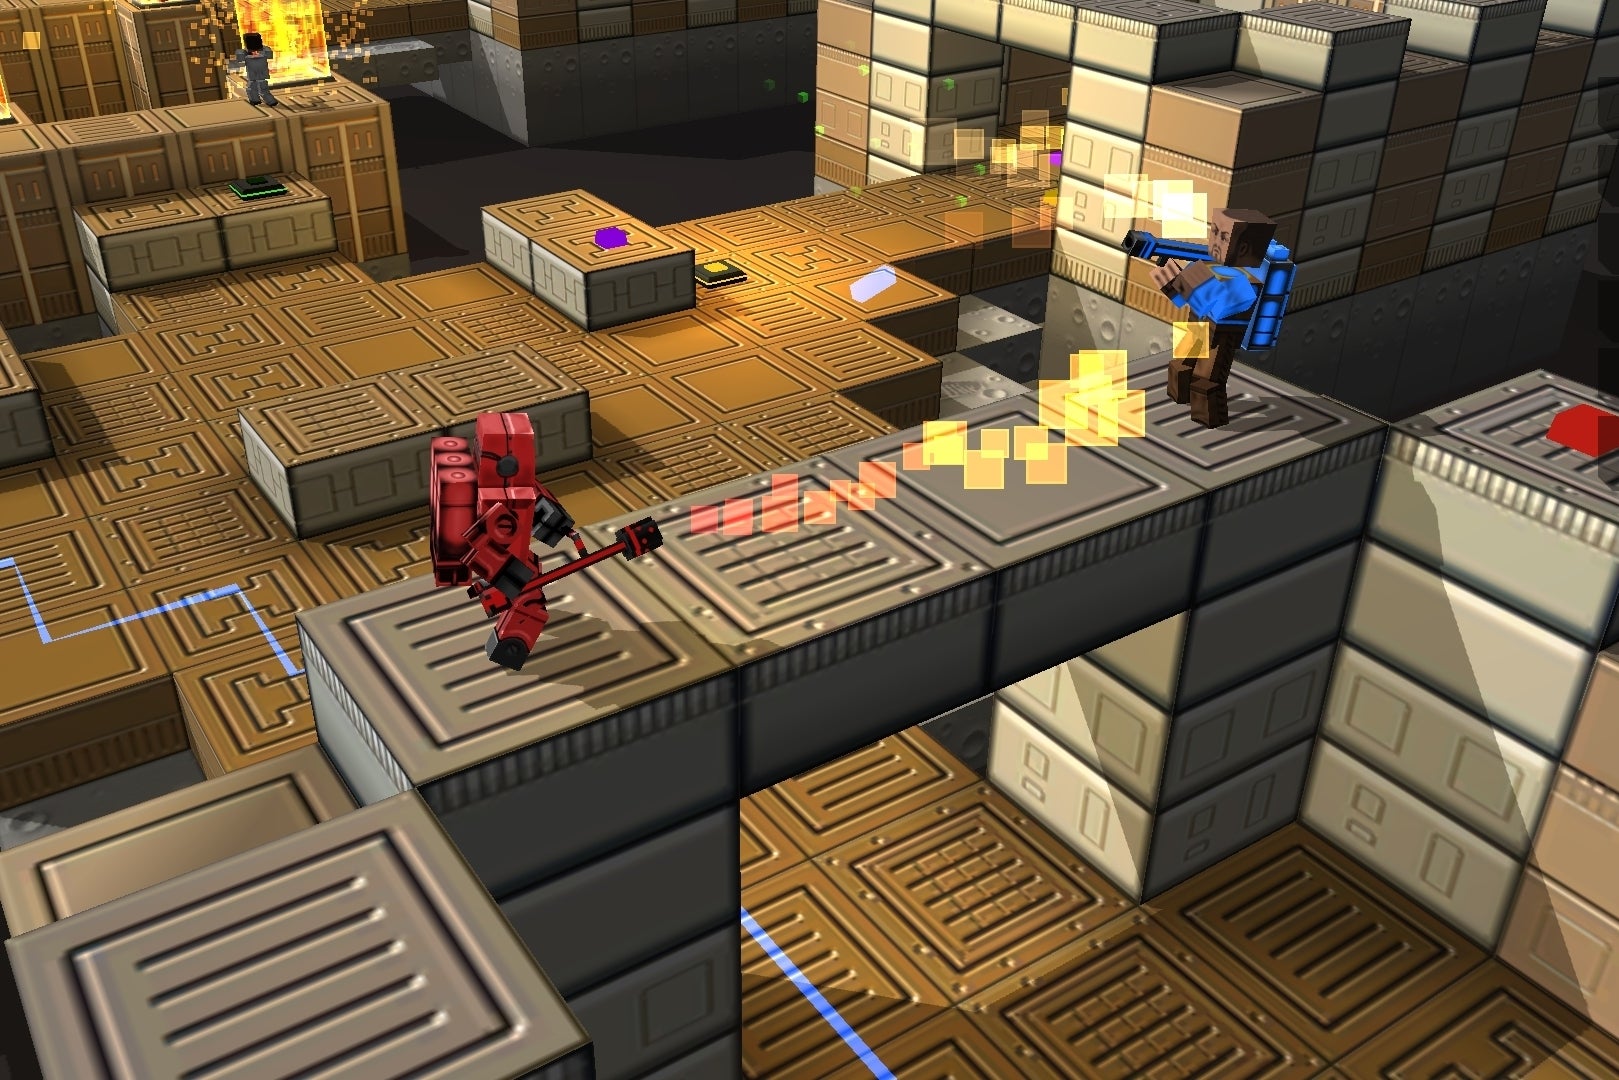 Image for Wii U debuts third-party cross-platform support with Cubemen 2